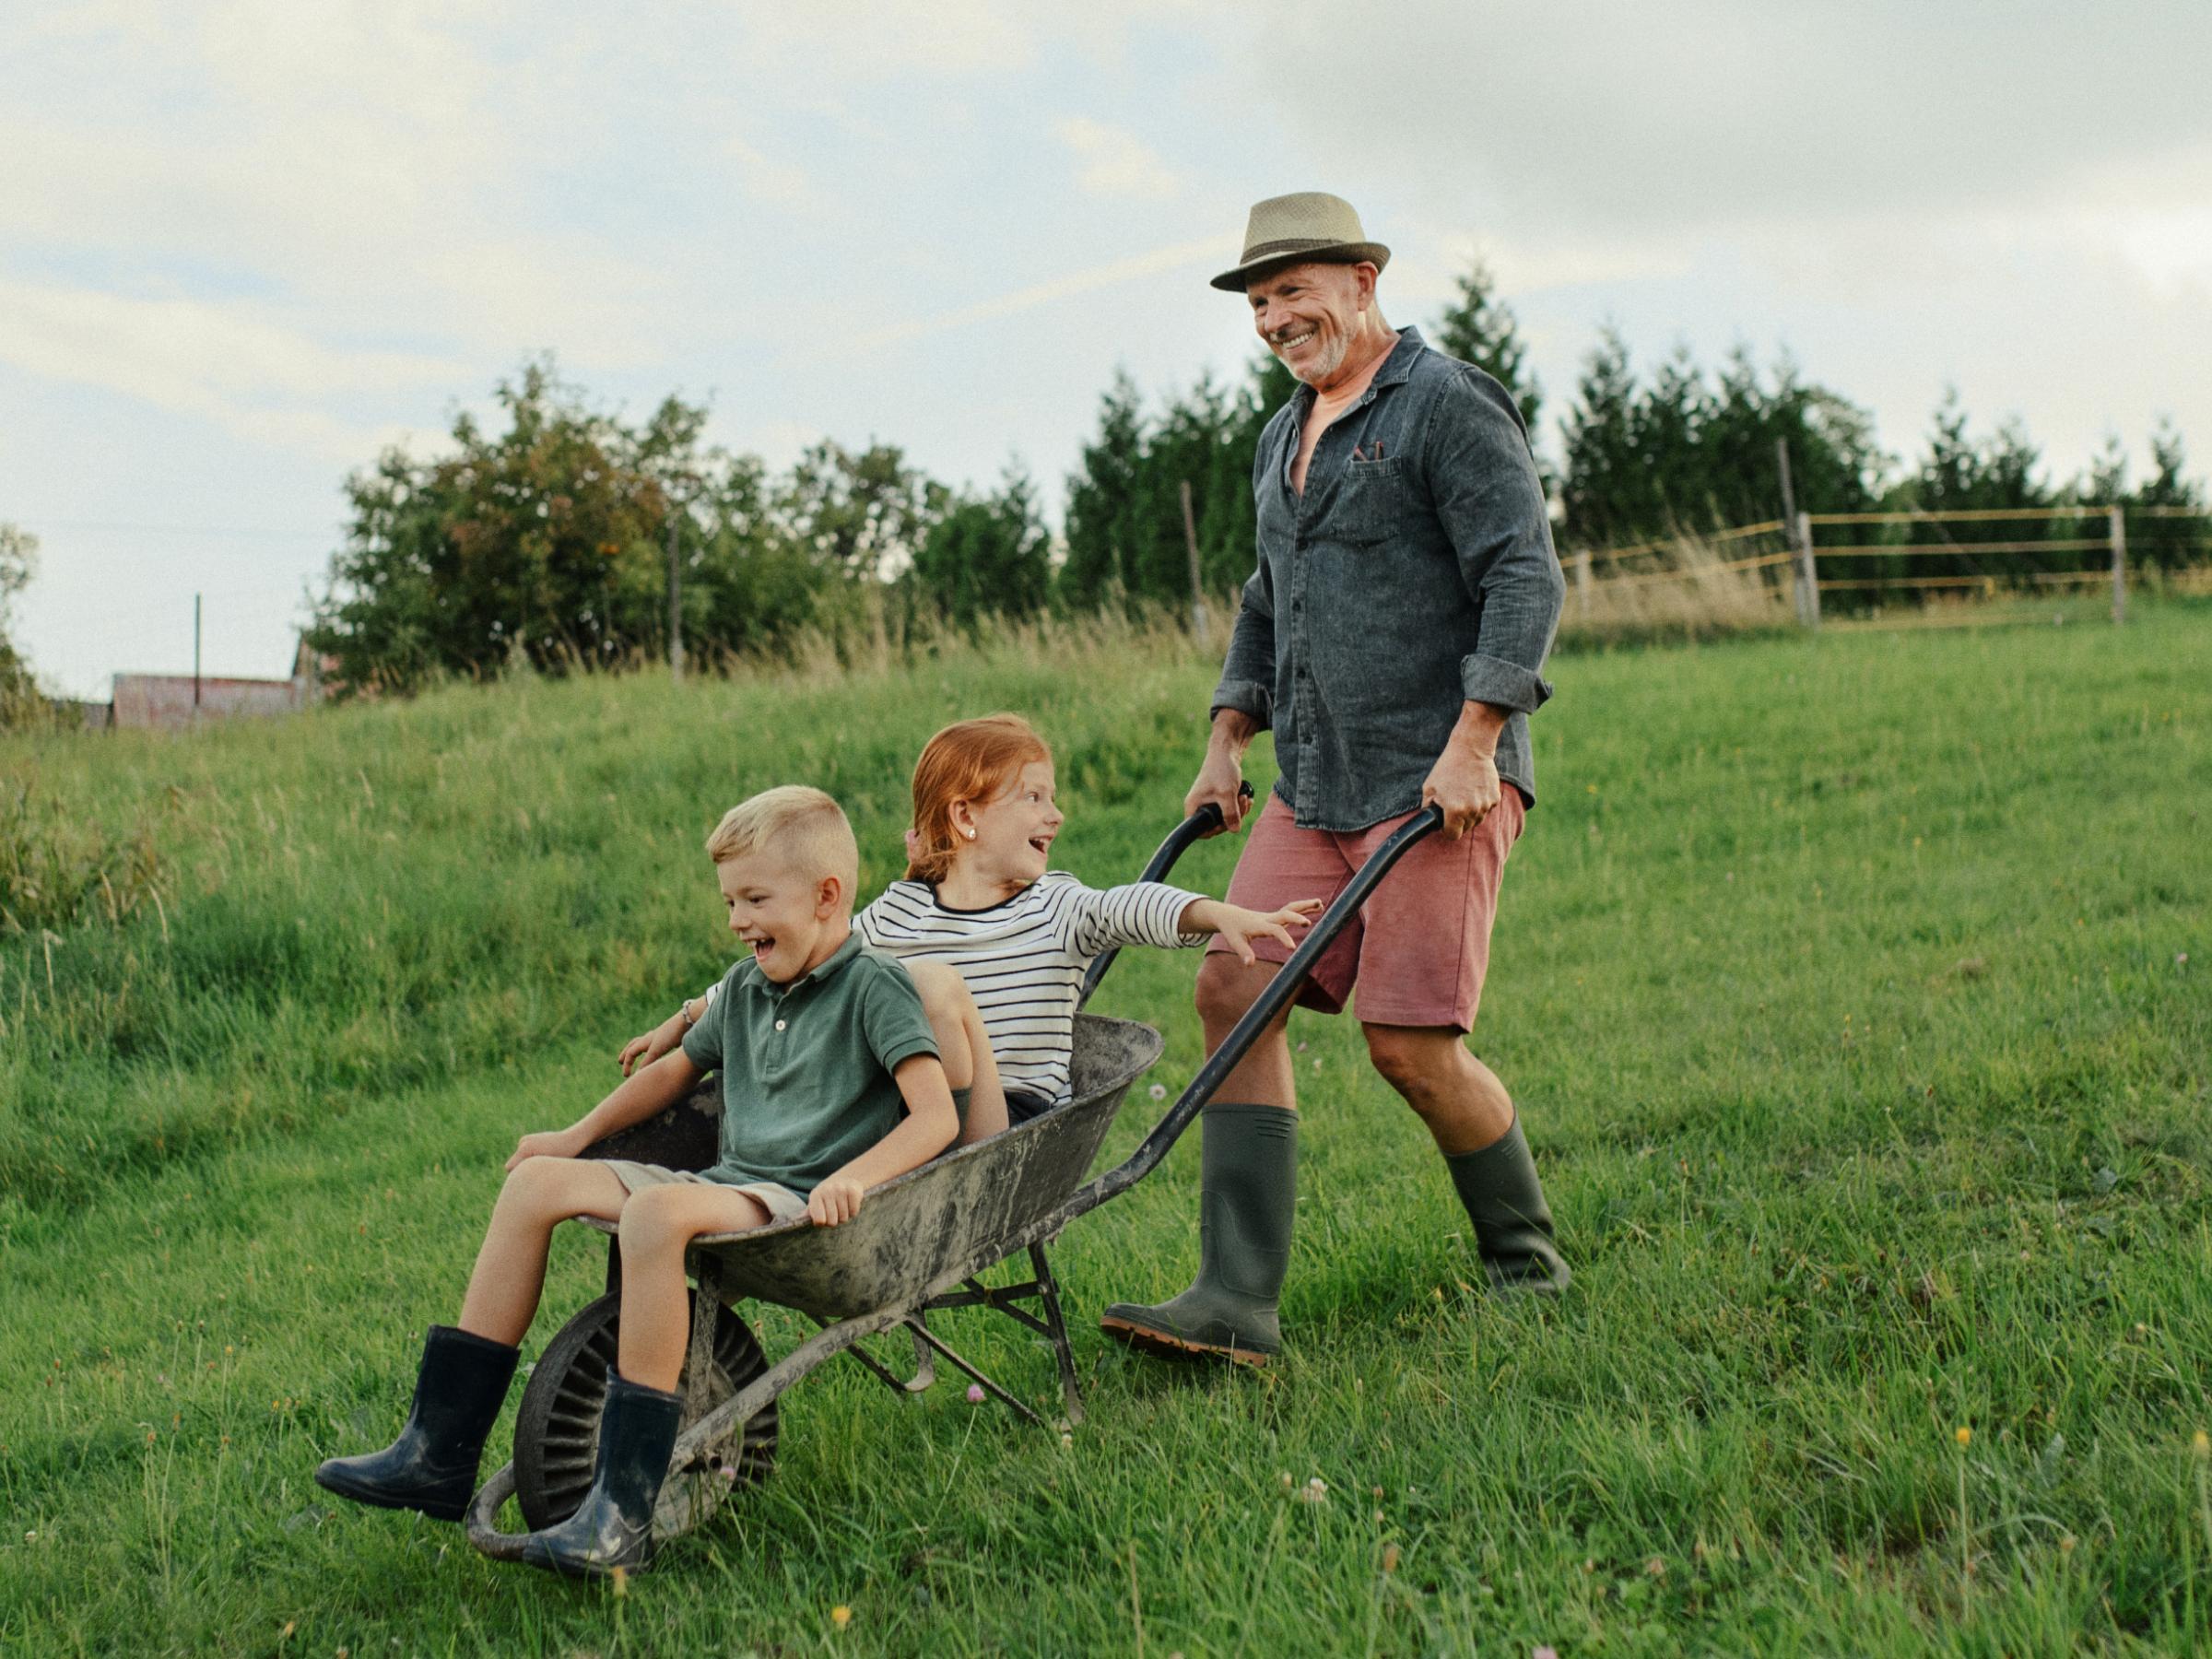 A Kiwi farmer supporting the weight of his grandchildren in a wheelbarrow.